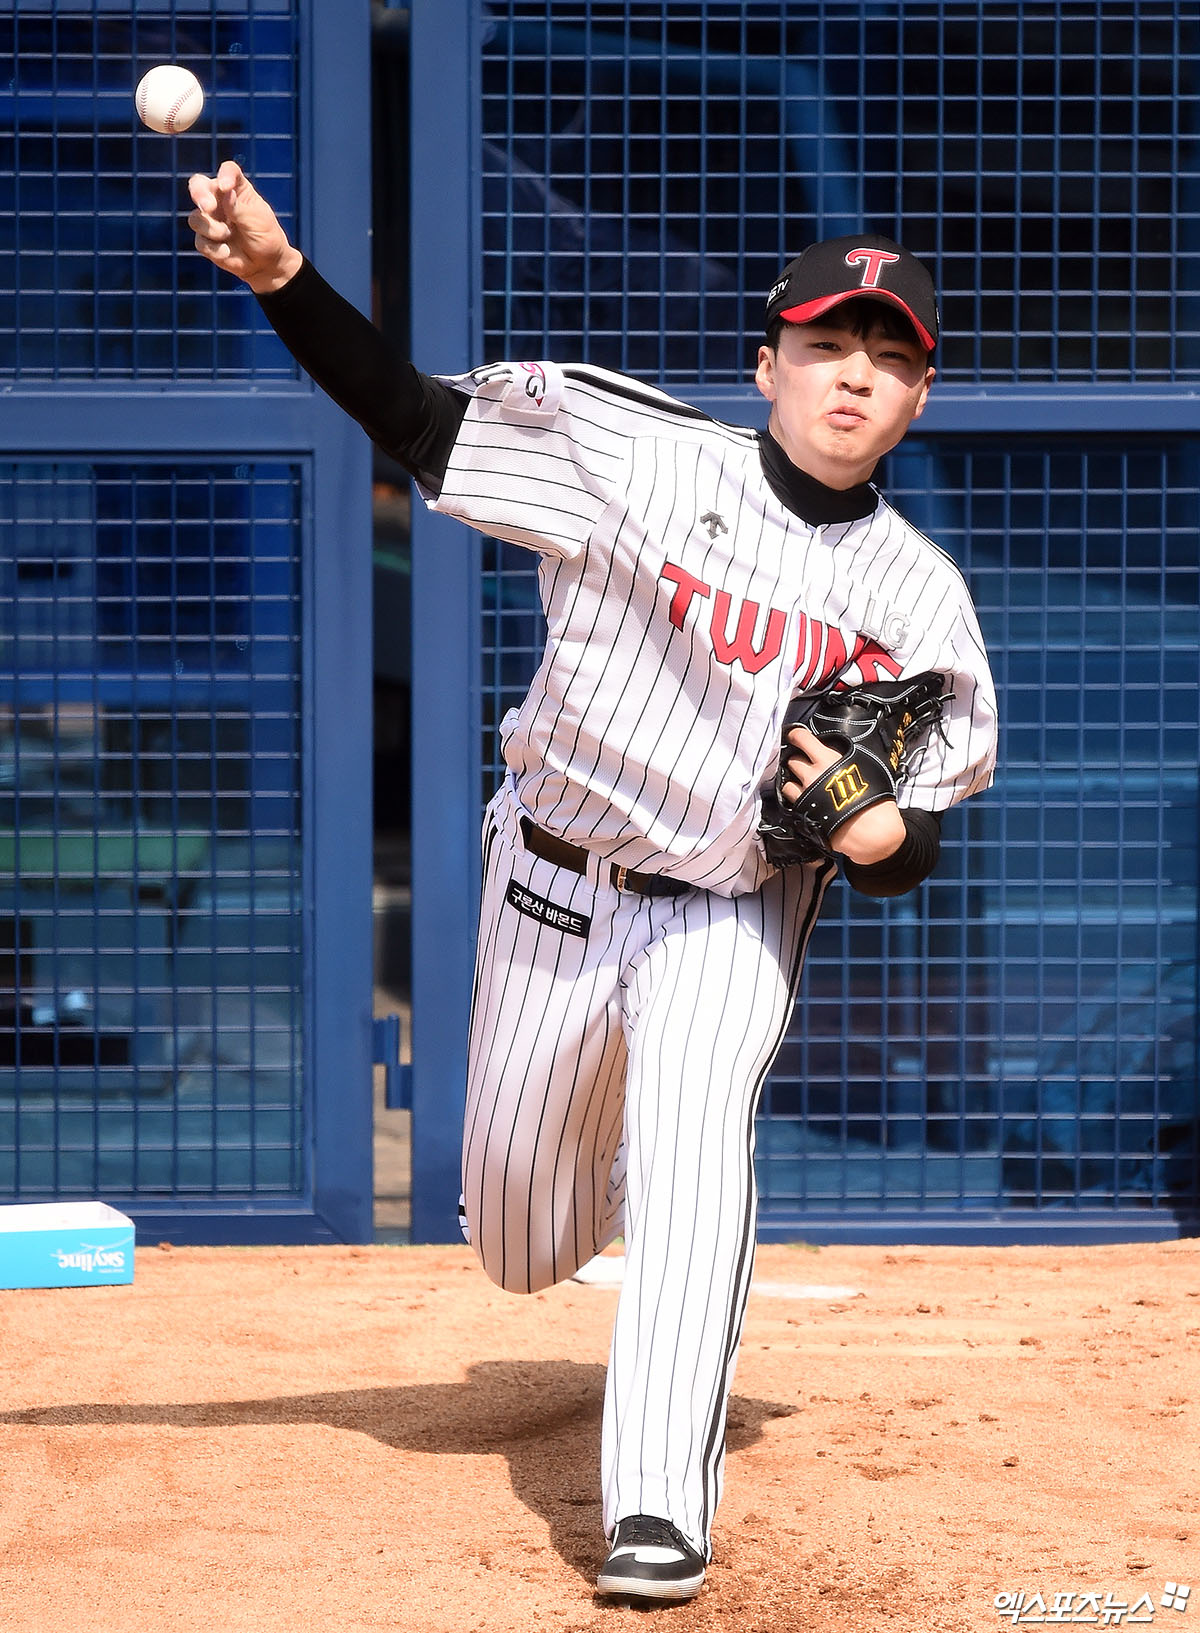 The LG Twins training was held at Jamsil-dong-dong Baseball Stadium in Songpa-gu, Seoul on the morning of the 19th. LG Lee Min-ho is pitching a bullpen.